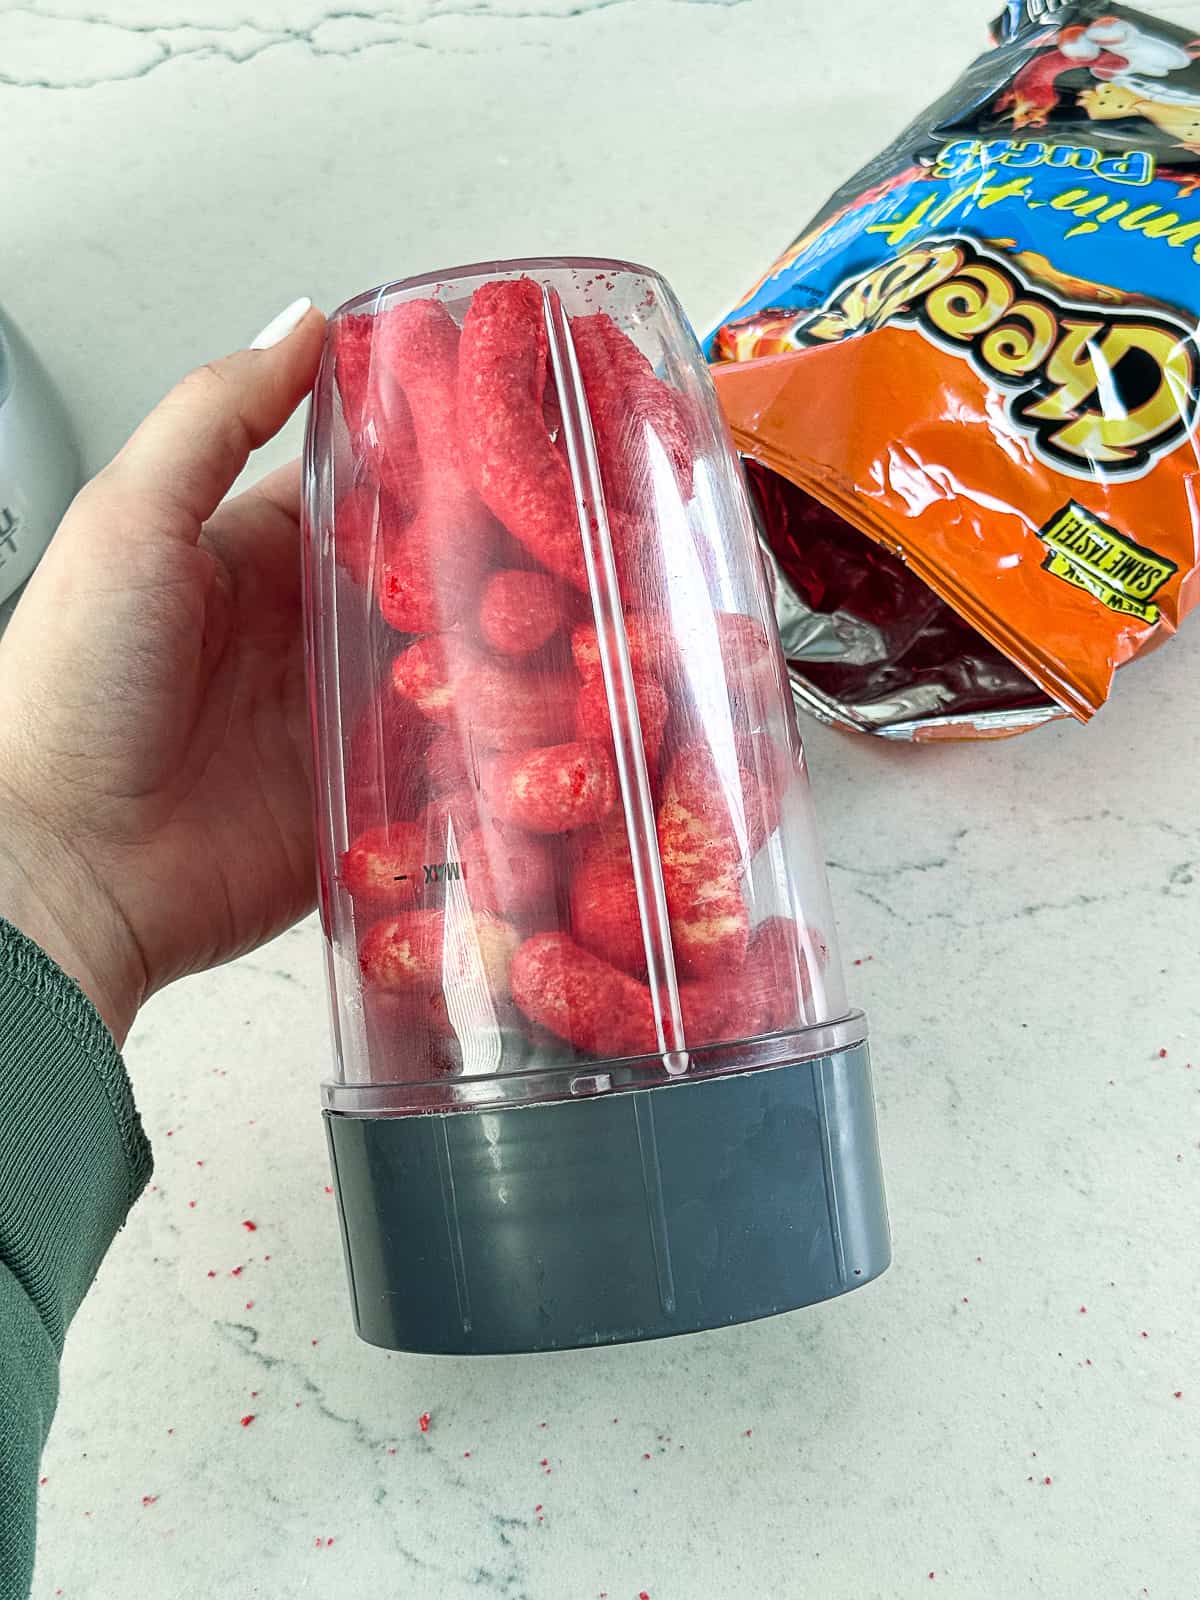 Holding a blender filled with Flamin' Hot Cheetos Snack